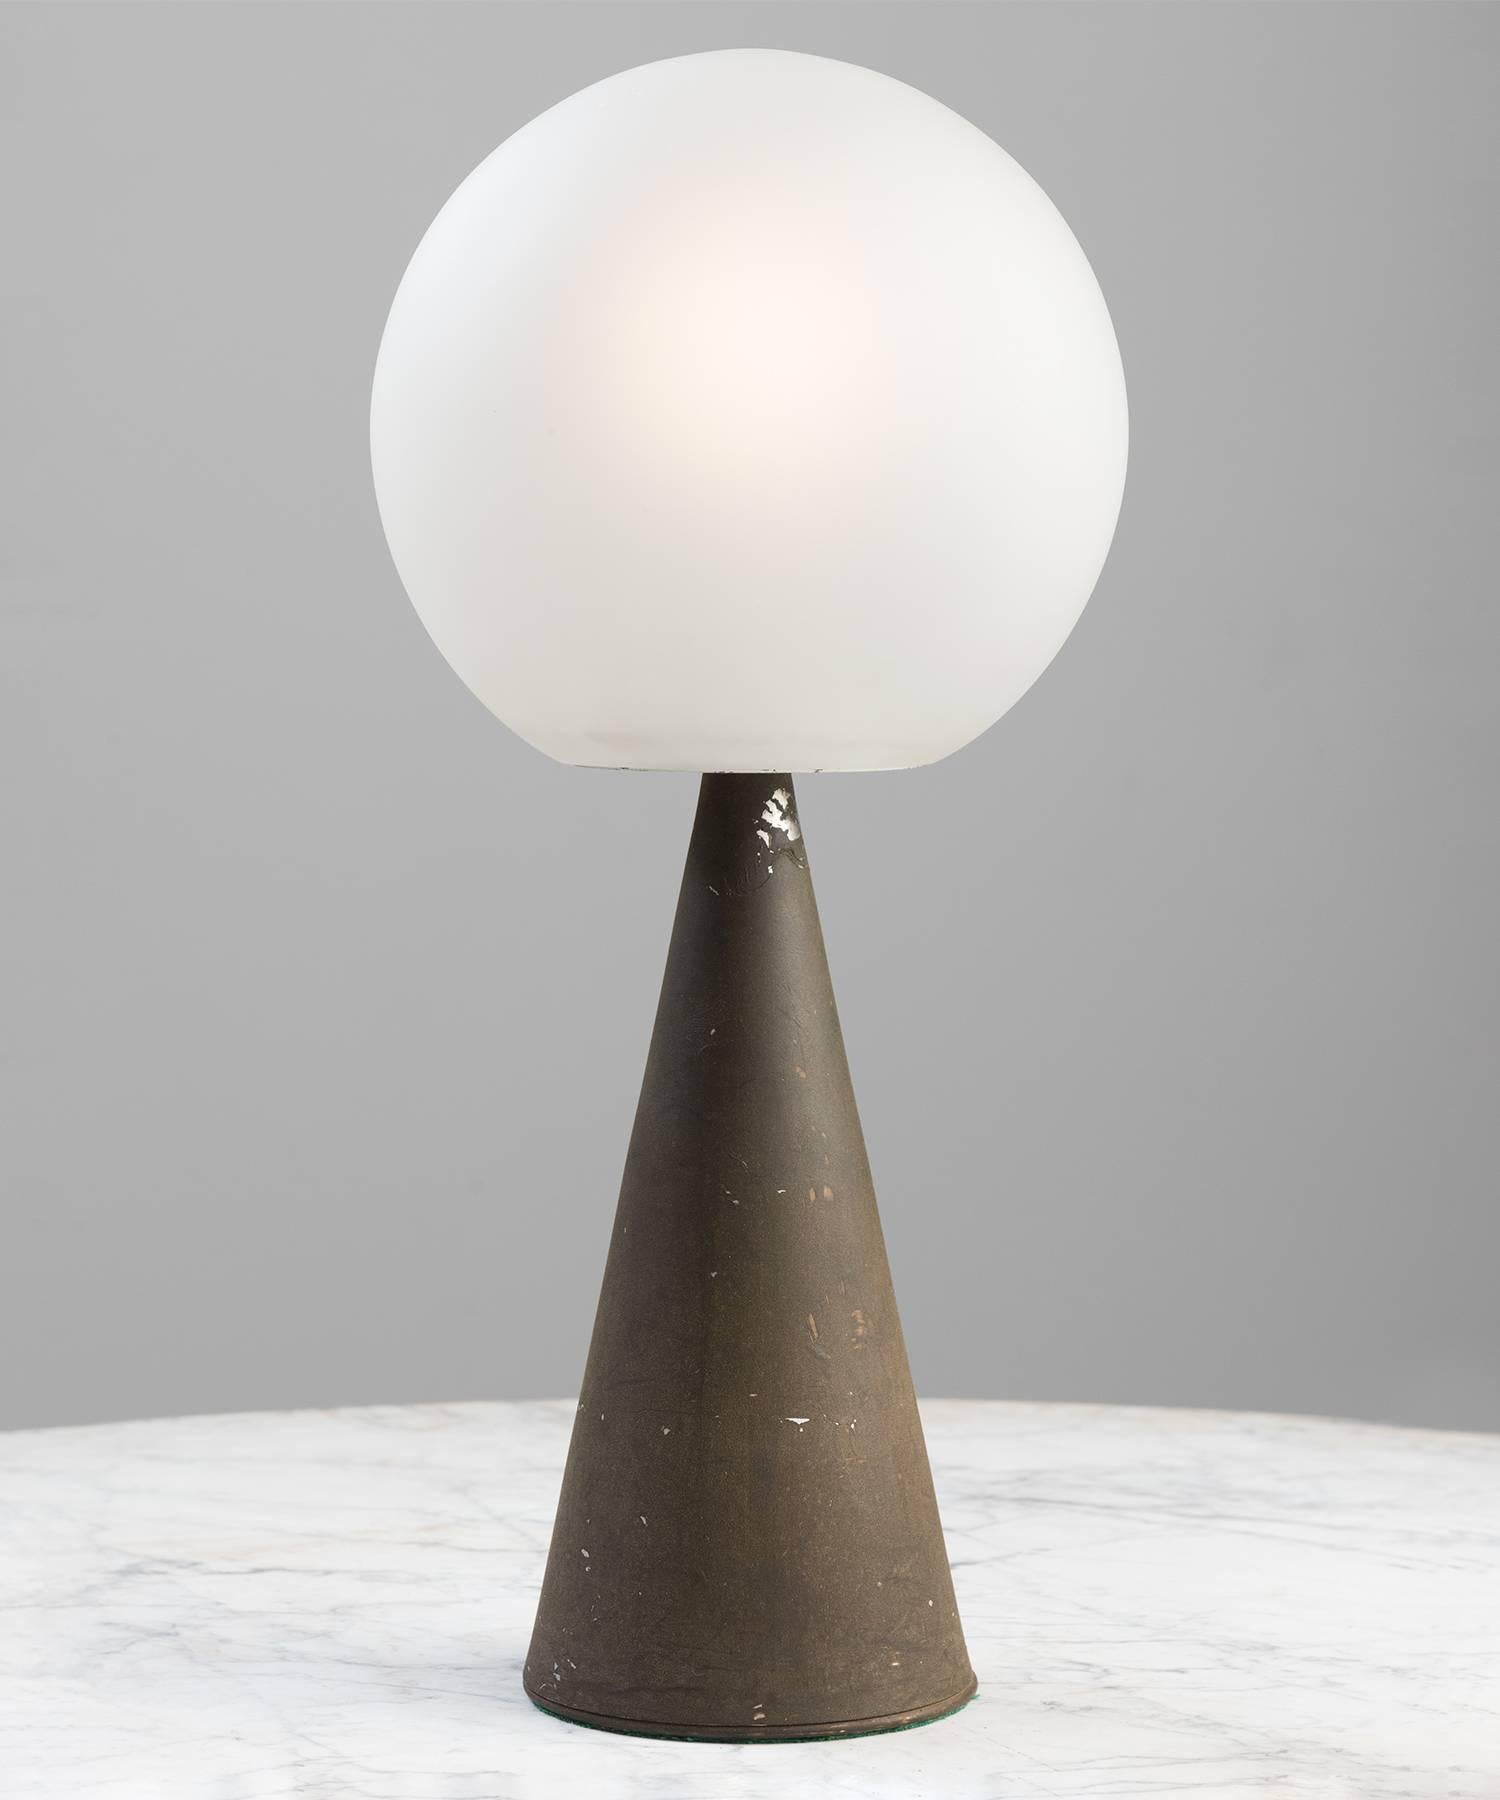 Model 2474 “Bilia” table lamp, designed by Gio Ponti and manufactured by Fontana Arte in 1968. 

Painted aluminium base in original finish with opal glass globe.